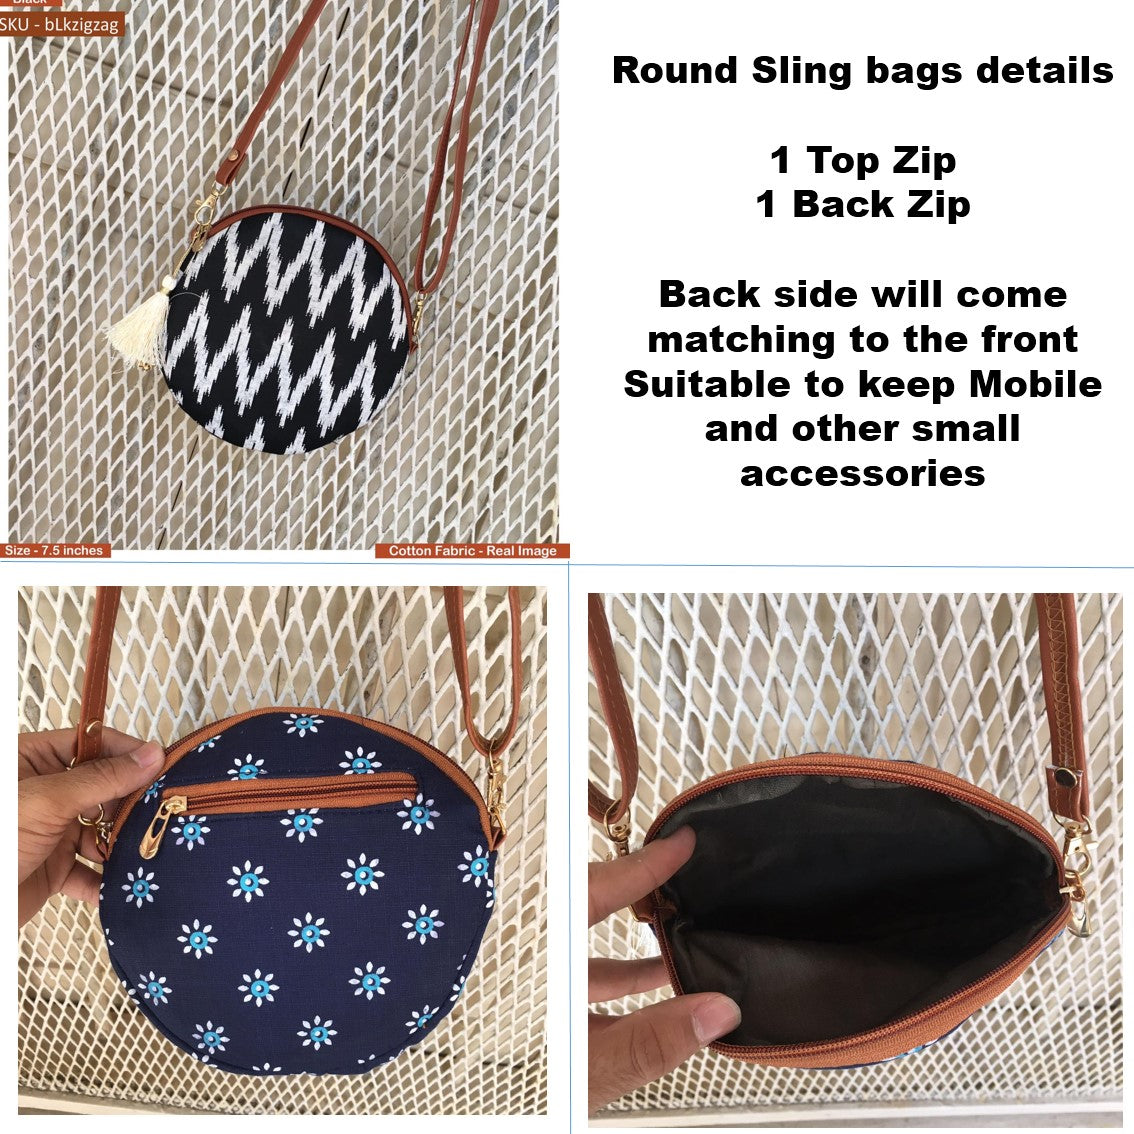 Brown Plain Cute Round Sling - Small size